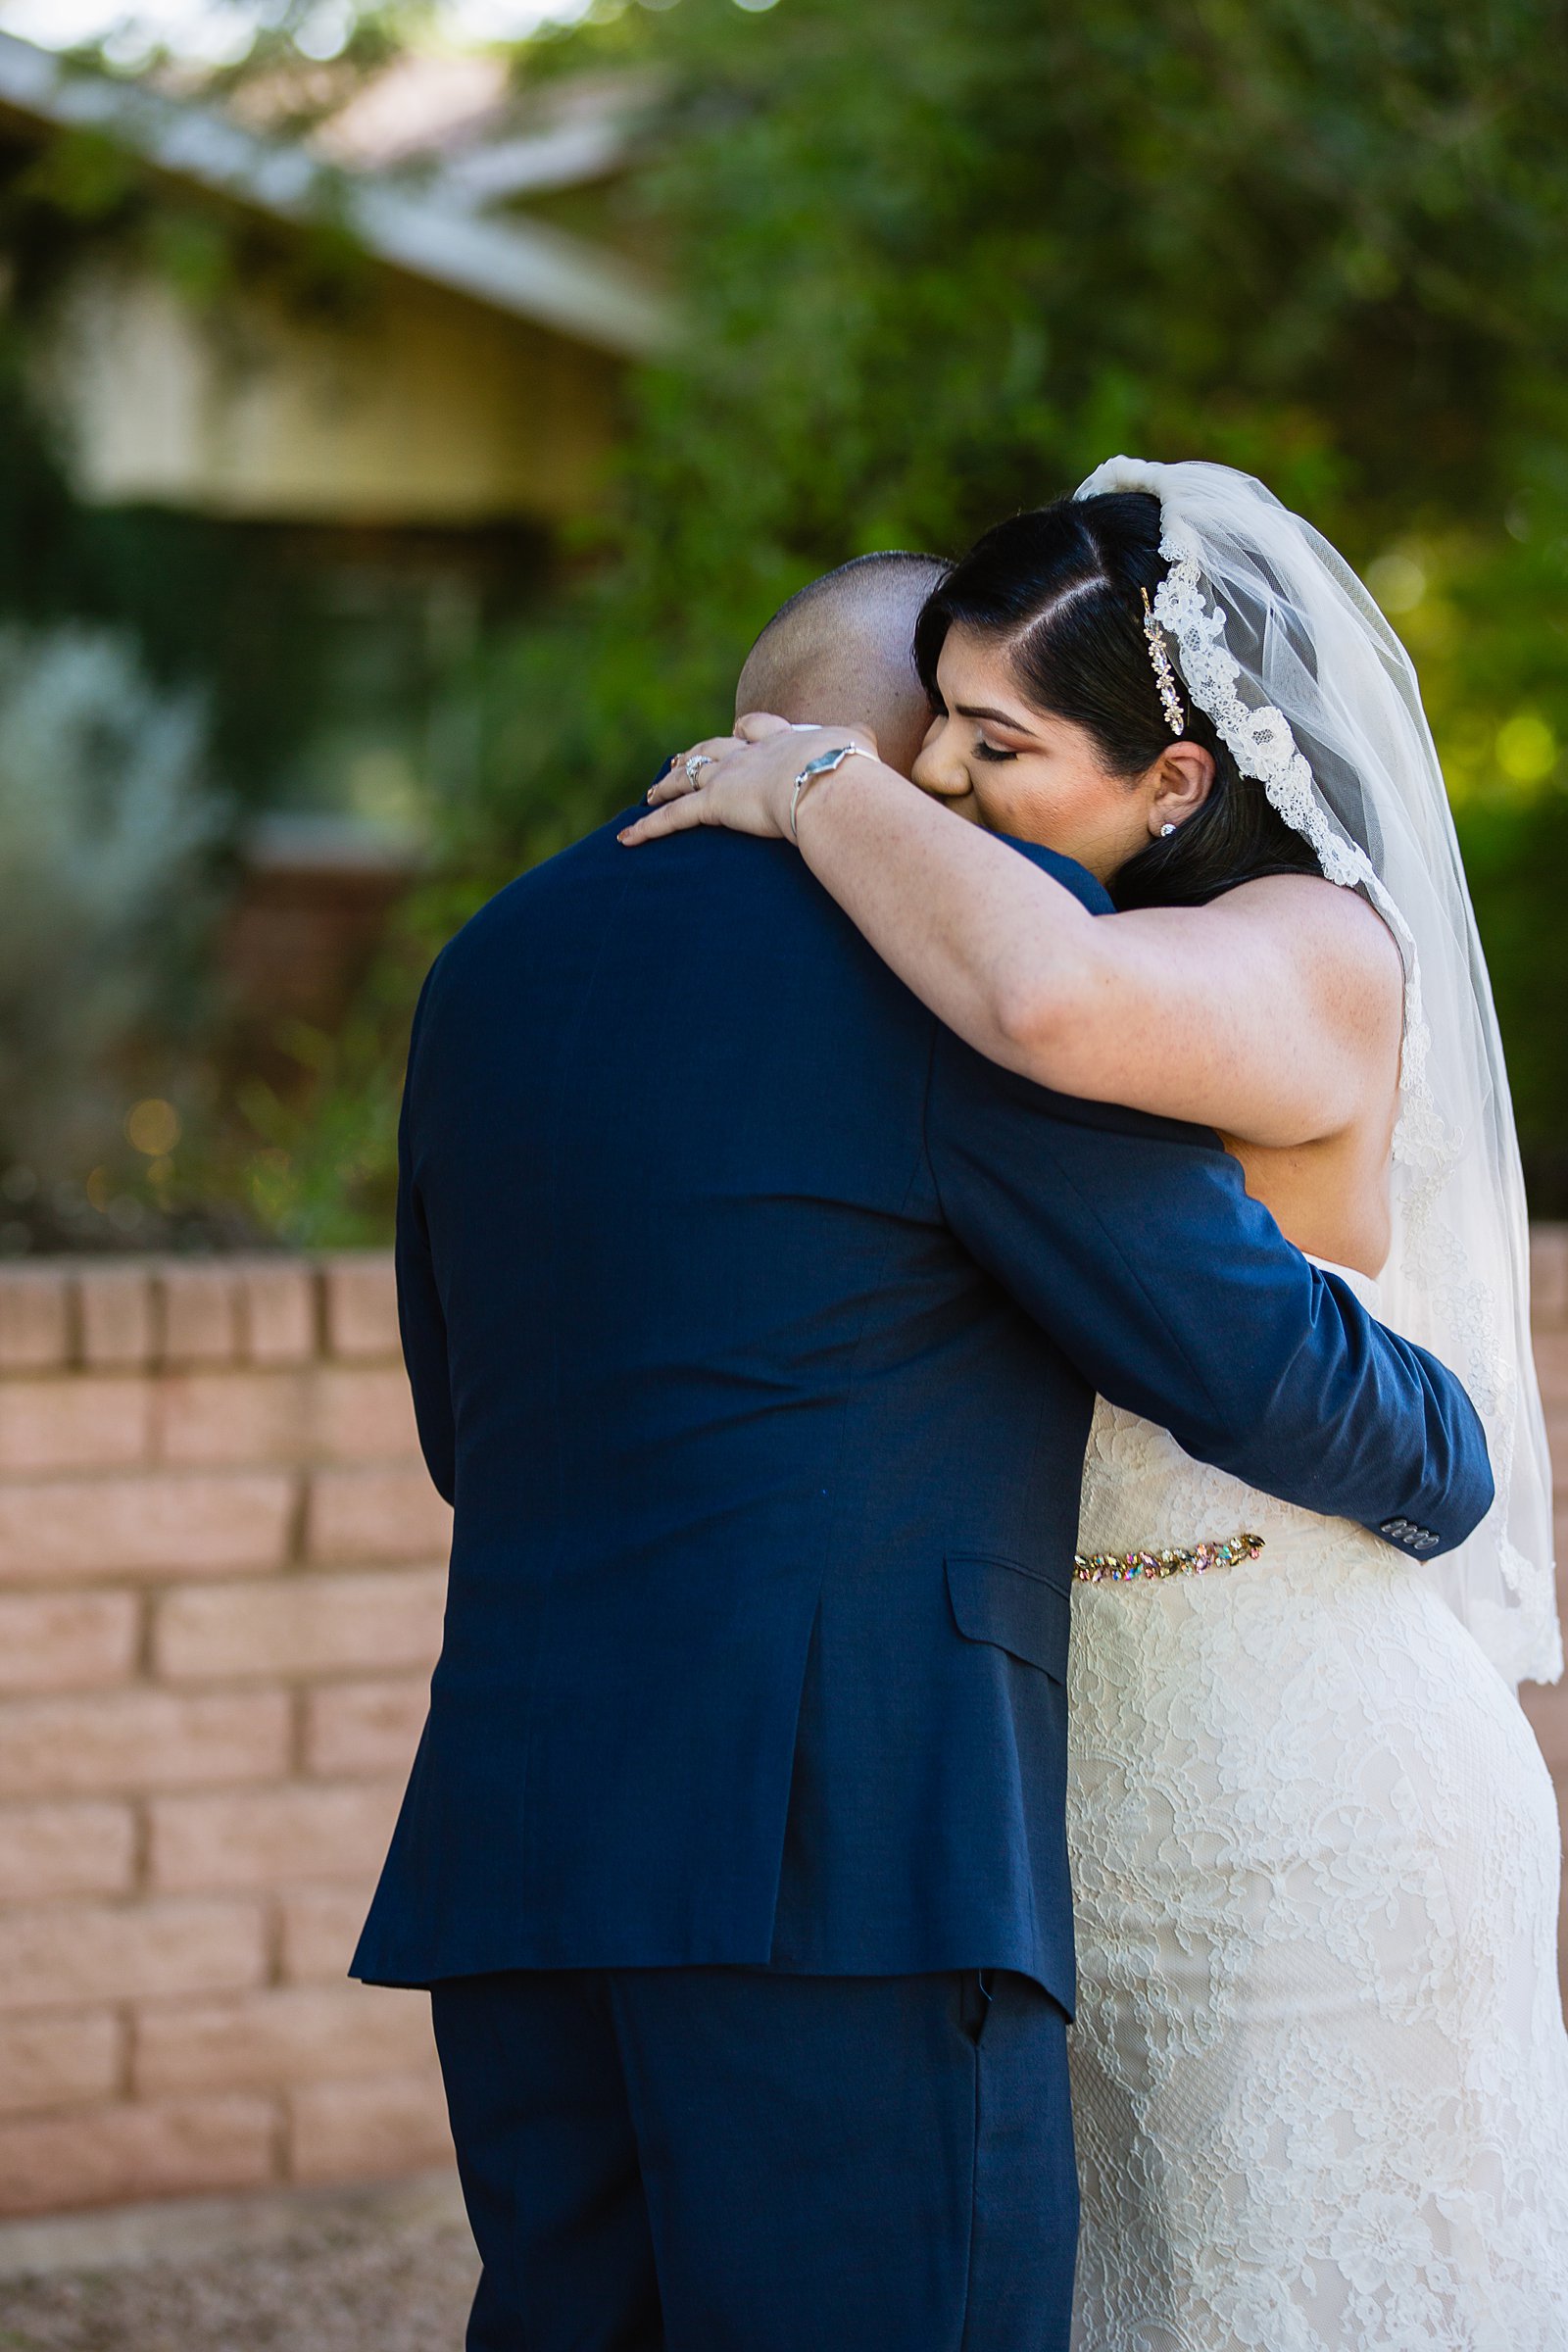 Bride and groom share an intimate moment during their first look at The Farmhouse at Schnepf Farms by Arizona wedding photographer PMA Photography.